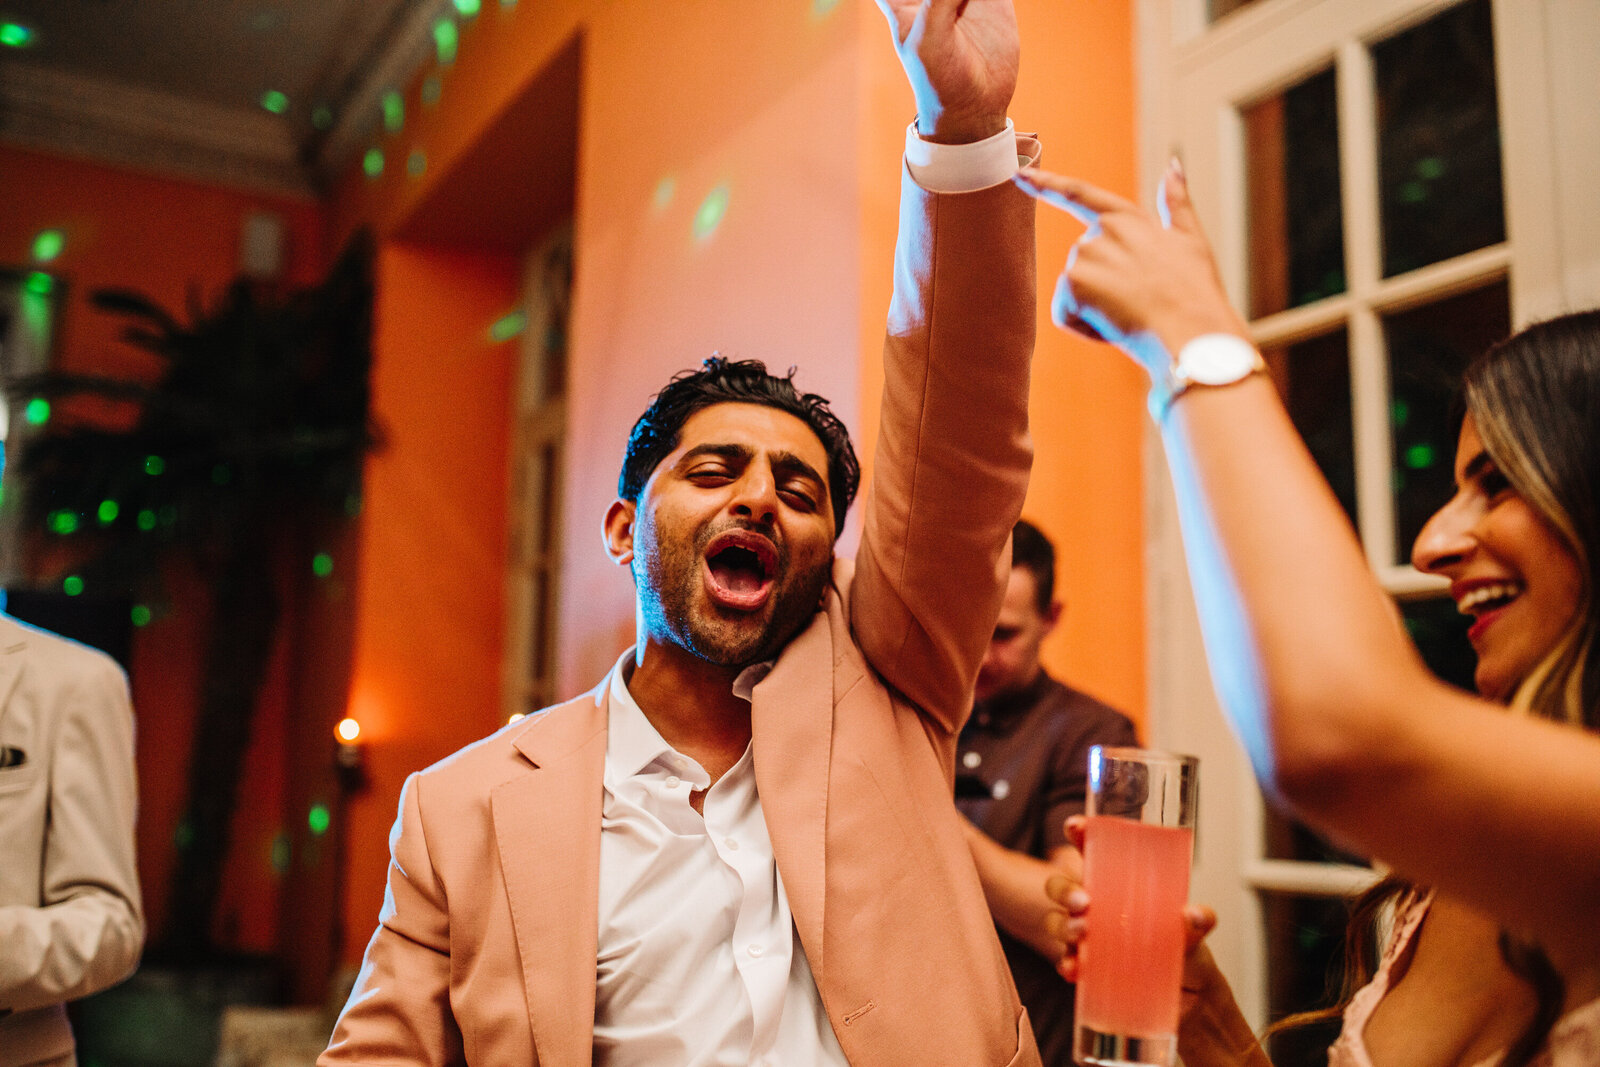 Wedding guest celebrating at reception party